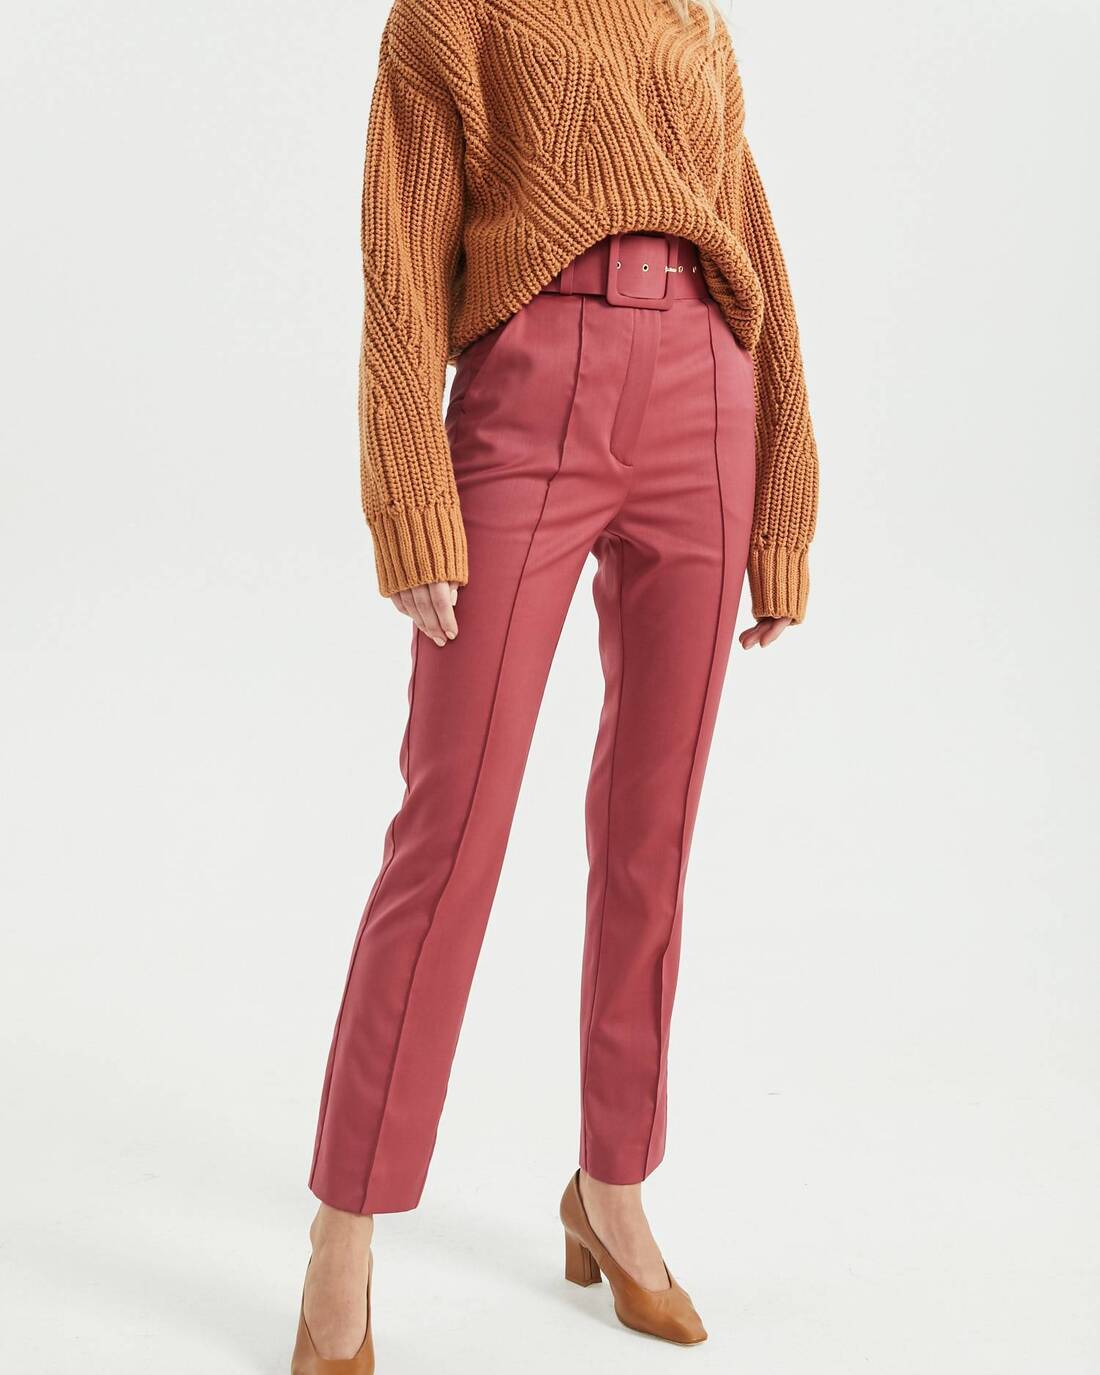 Fitted wool pants with decorative stitching